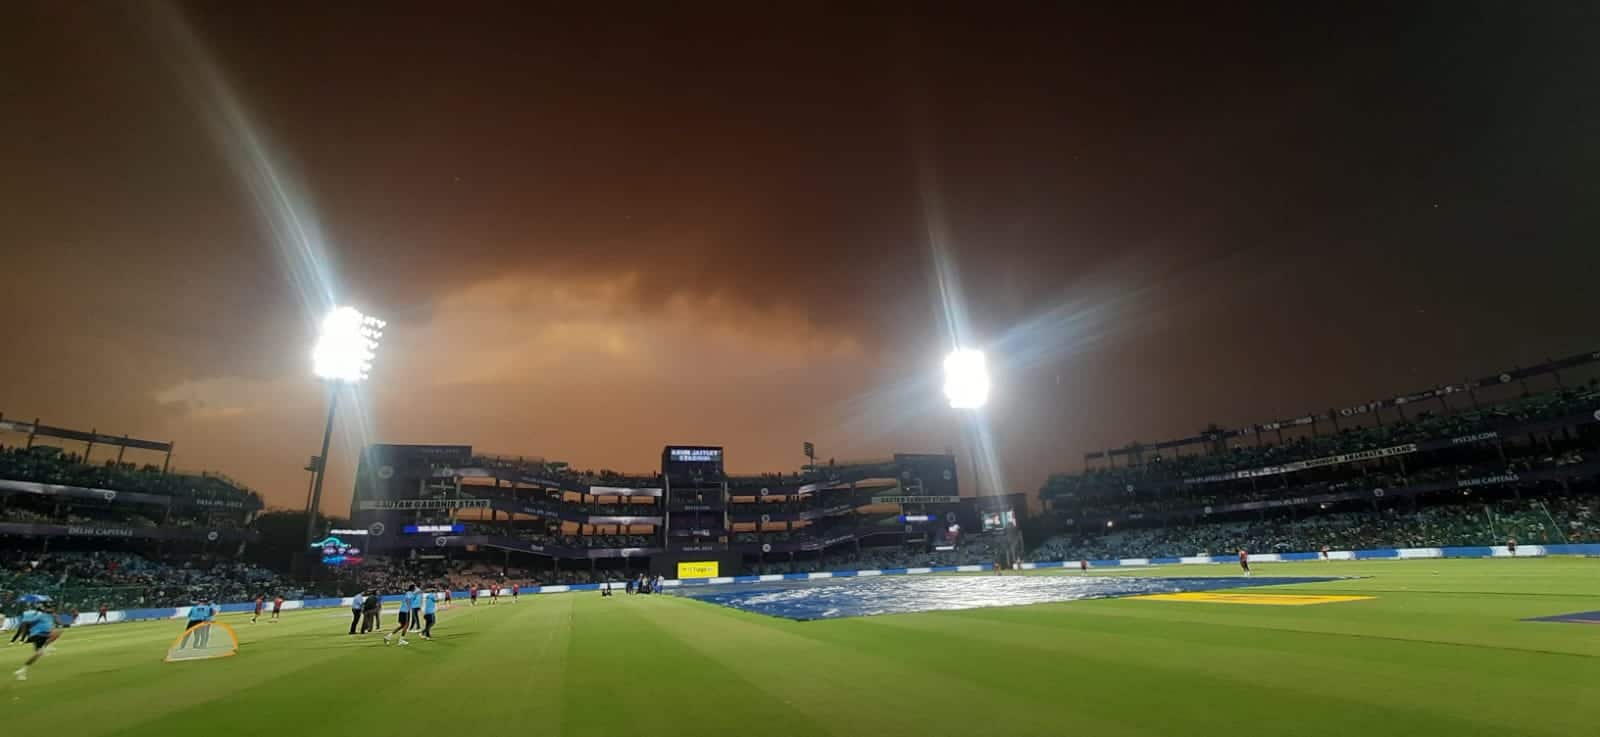 Weather Report: Will Rain Gods be Kind Enough for DC vs PBKS Match at Arun Jaitley Stadium?